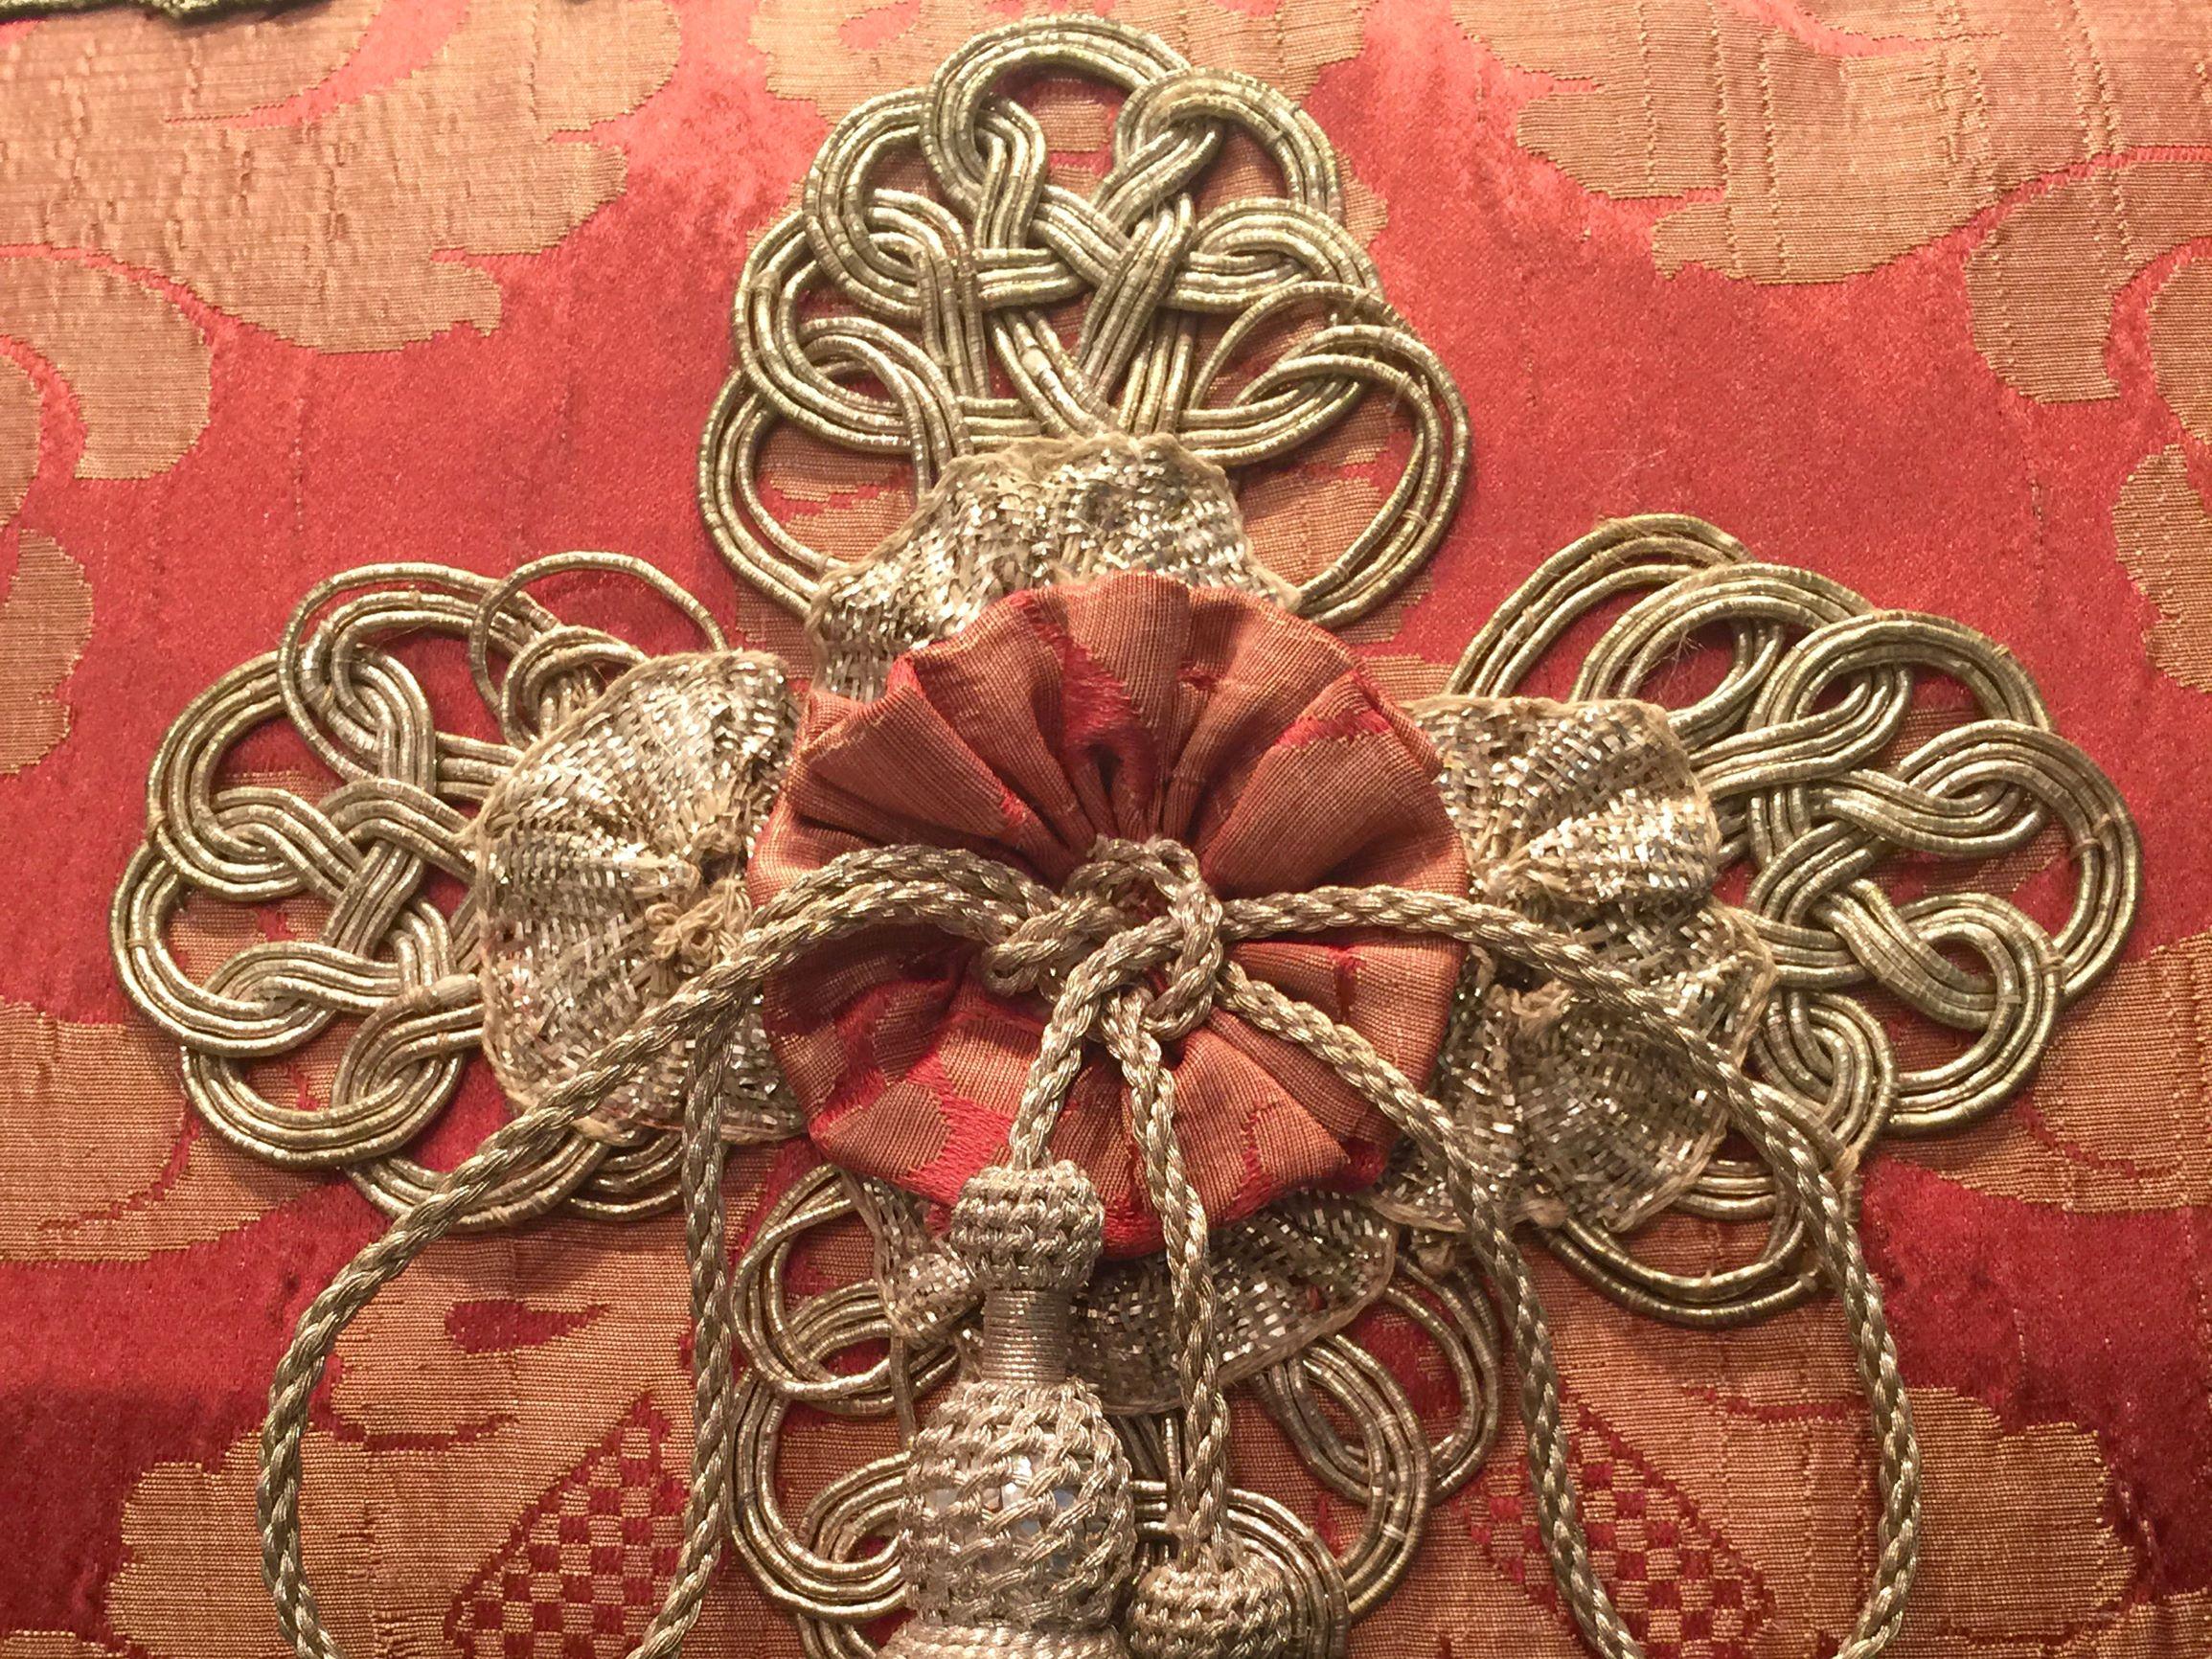 18th century Italian Salmon Silk Damask is embellished by custom made central decor of antique Italian trim, rosettes (the silver ones have real silver thread woven throughout) and two 19th century Italian metal thread tassels. The two horizontal